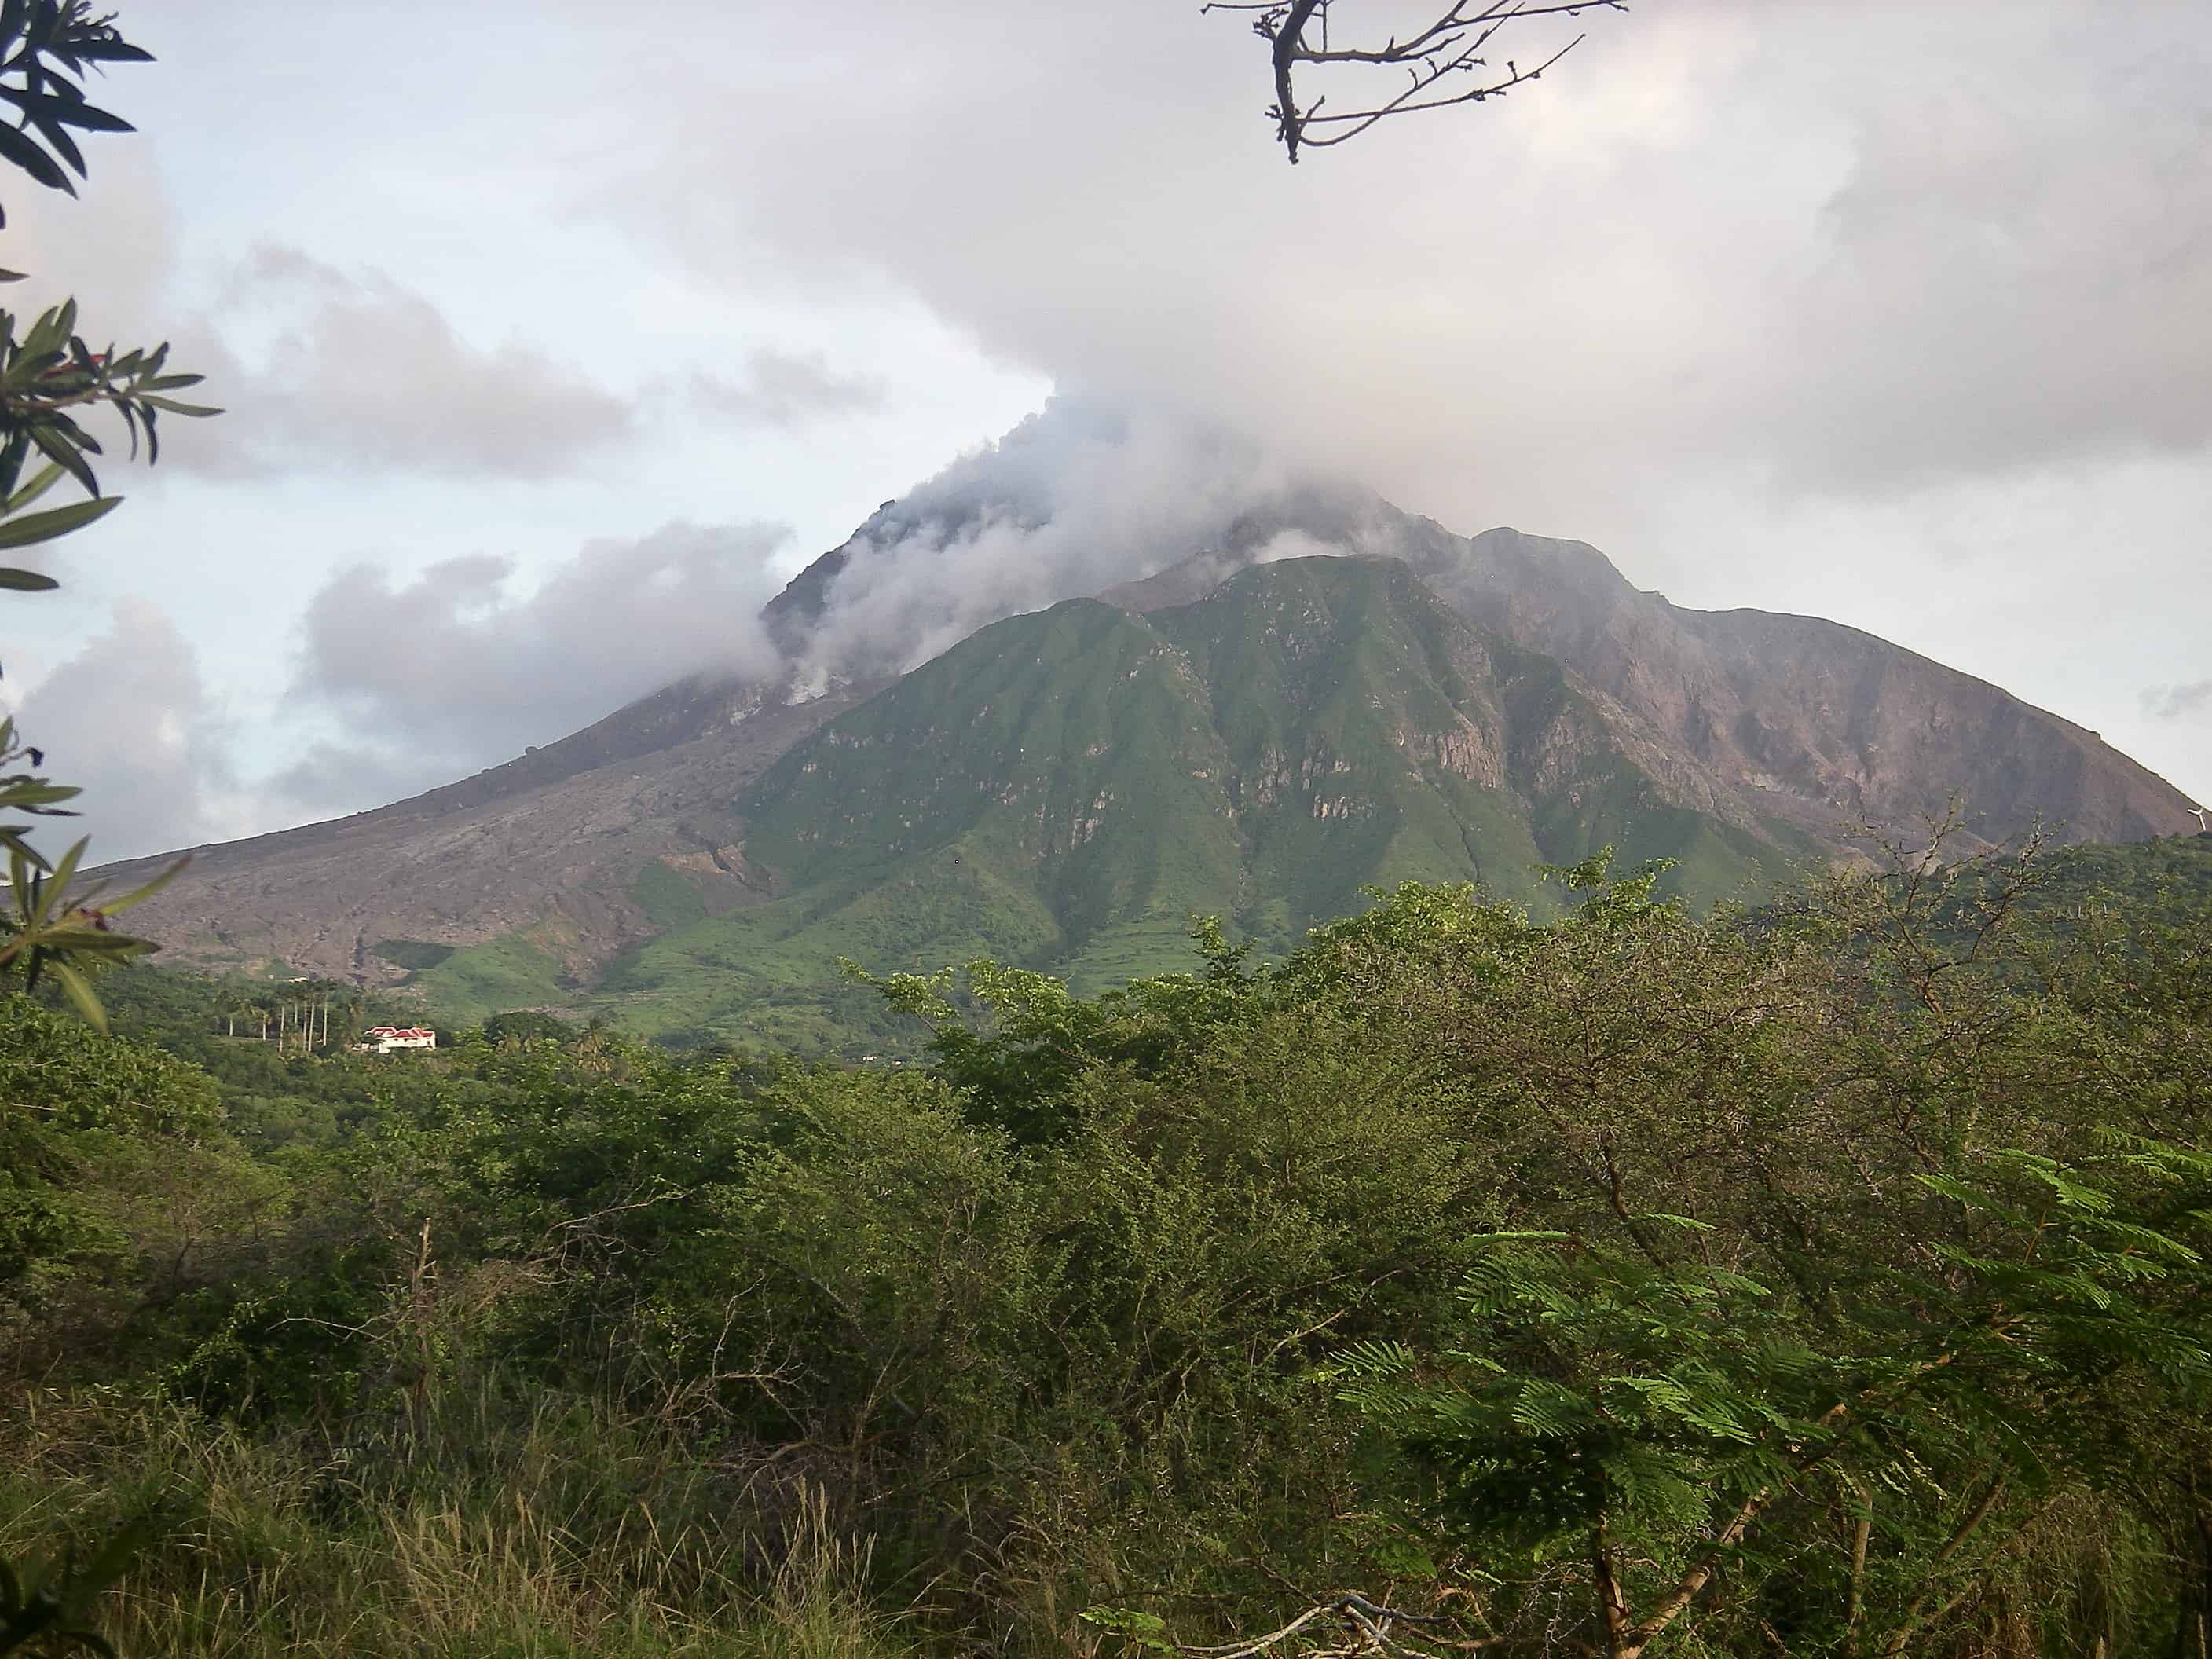 The Soufriere volcano in a still fairly active phase, with fumes from its flanks mixing with its almost permanent summit cloud. Copyright: Dr Mike Pienkowski